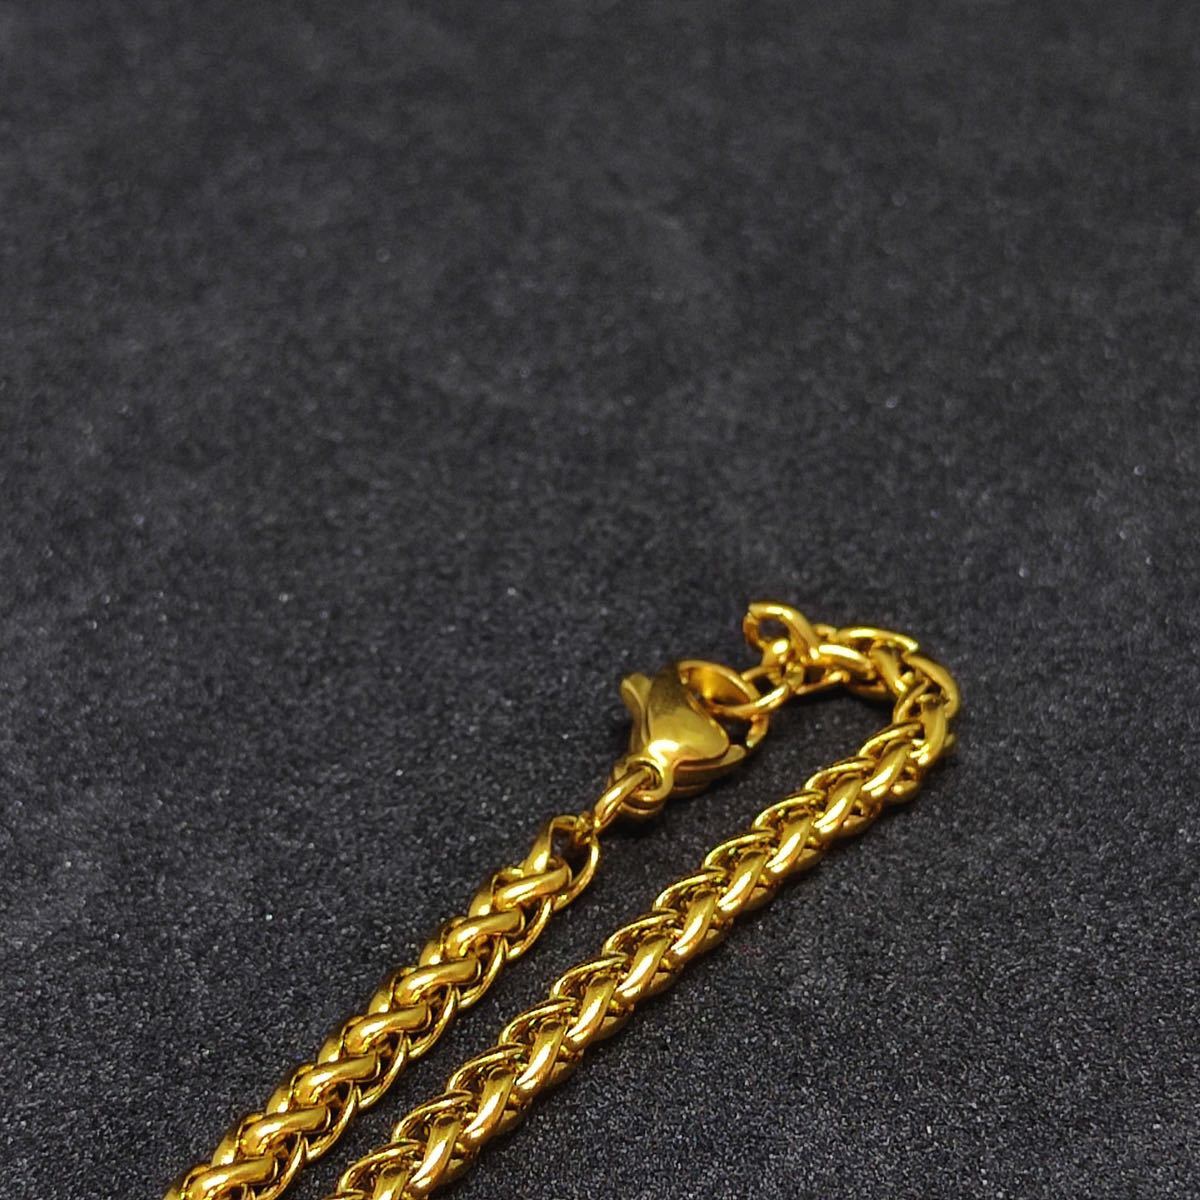 Gold Necklace ロープチェーン 金ネックレス ゴールドネックレス チェーンネックレス 303_画像4